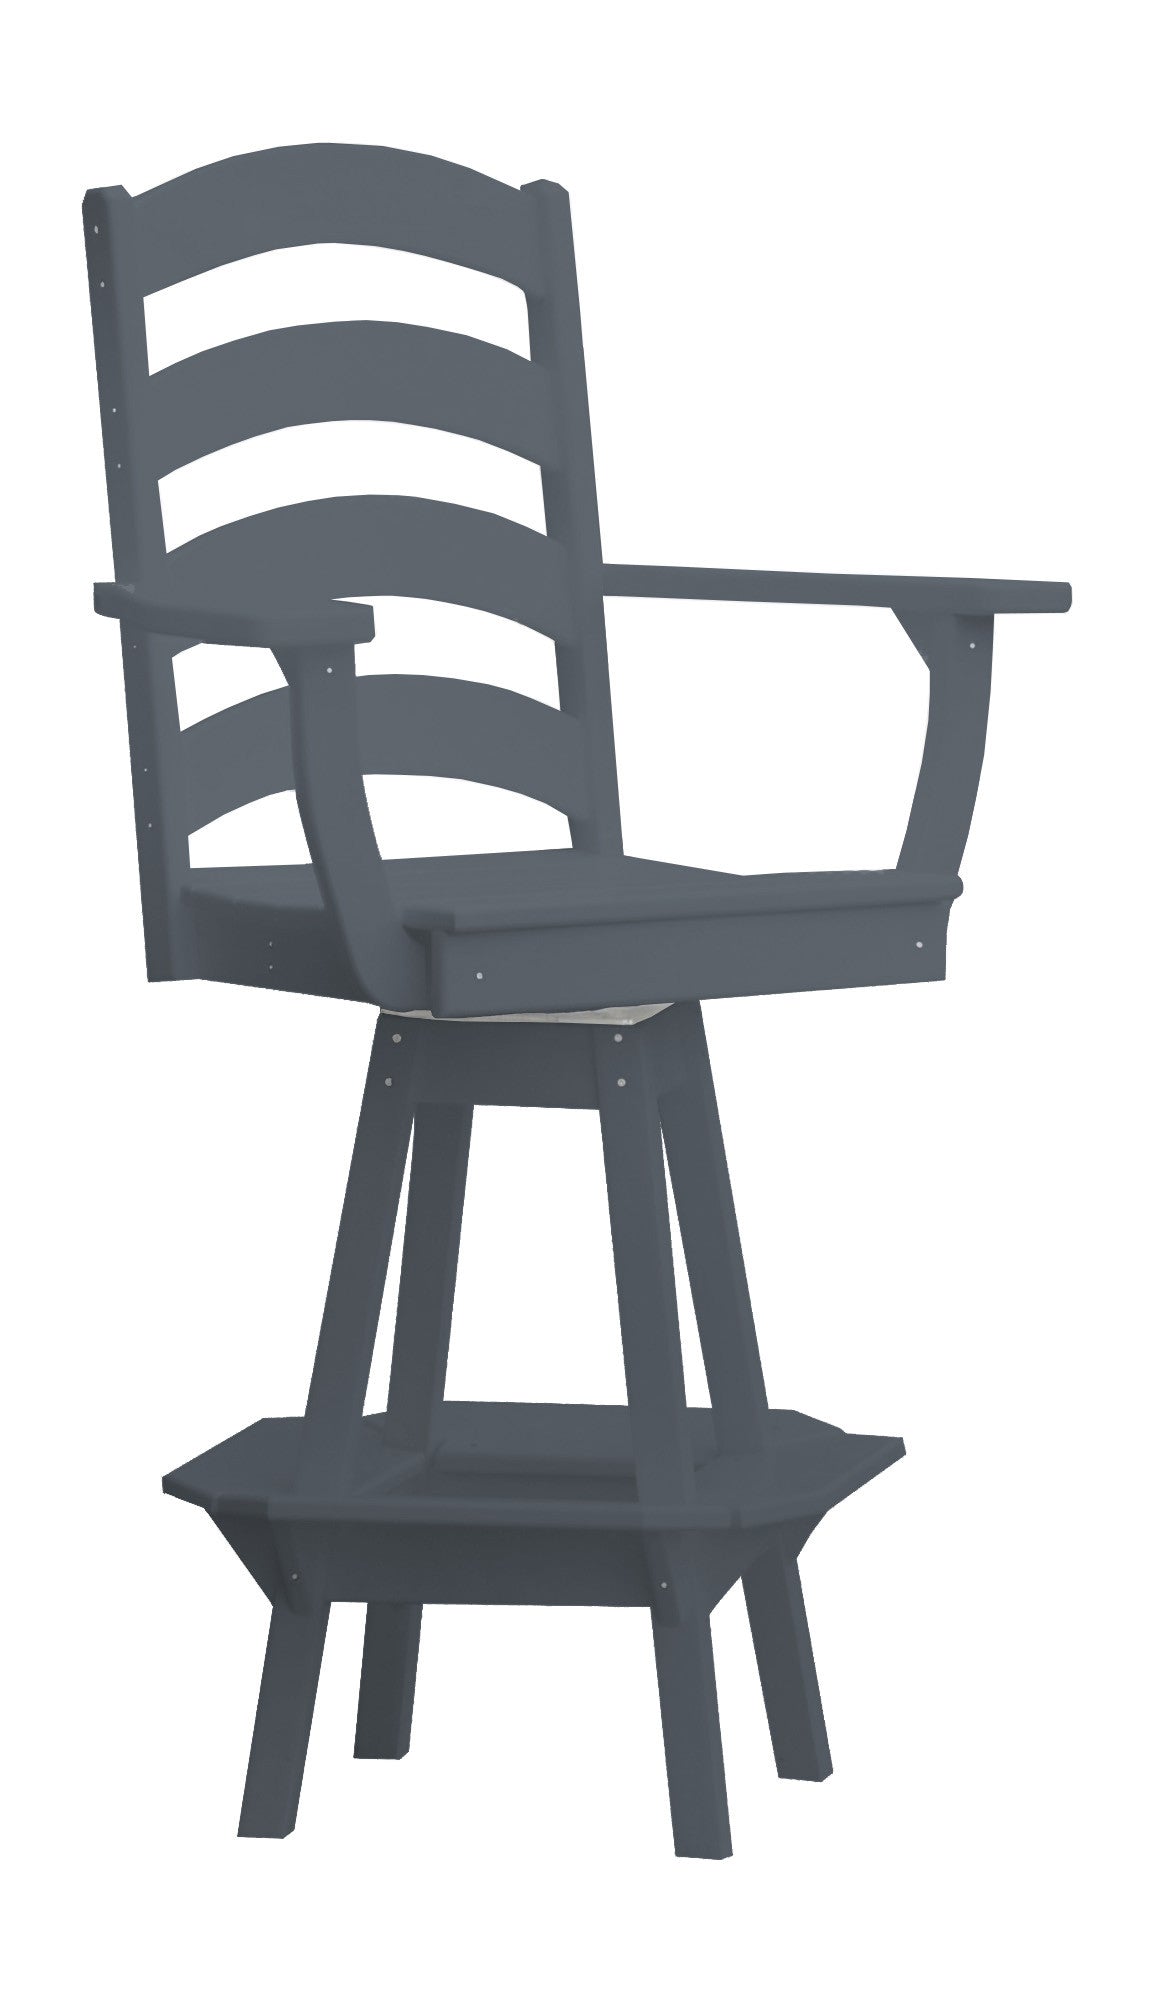 A&L Furniture Recycled Plastic Ladderback Swivel Bar Chair with Arms - Dark Gray